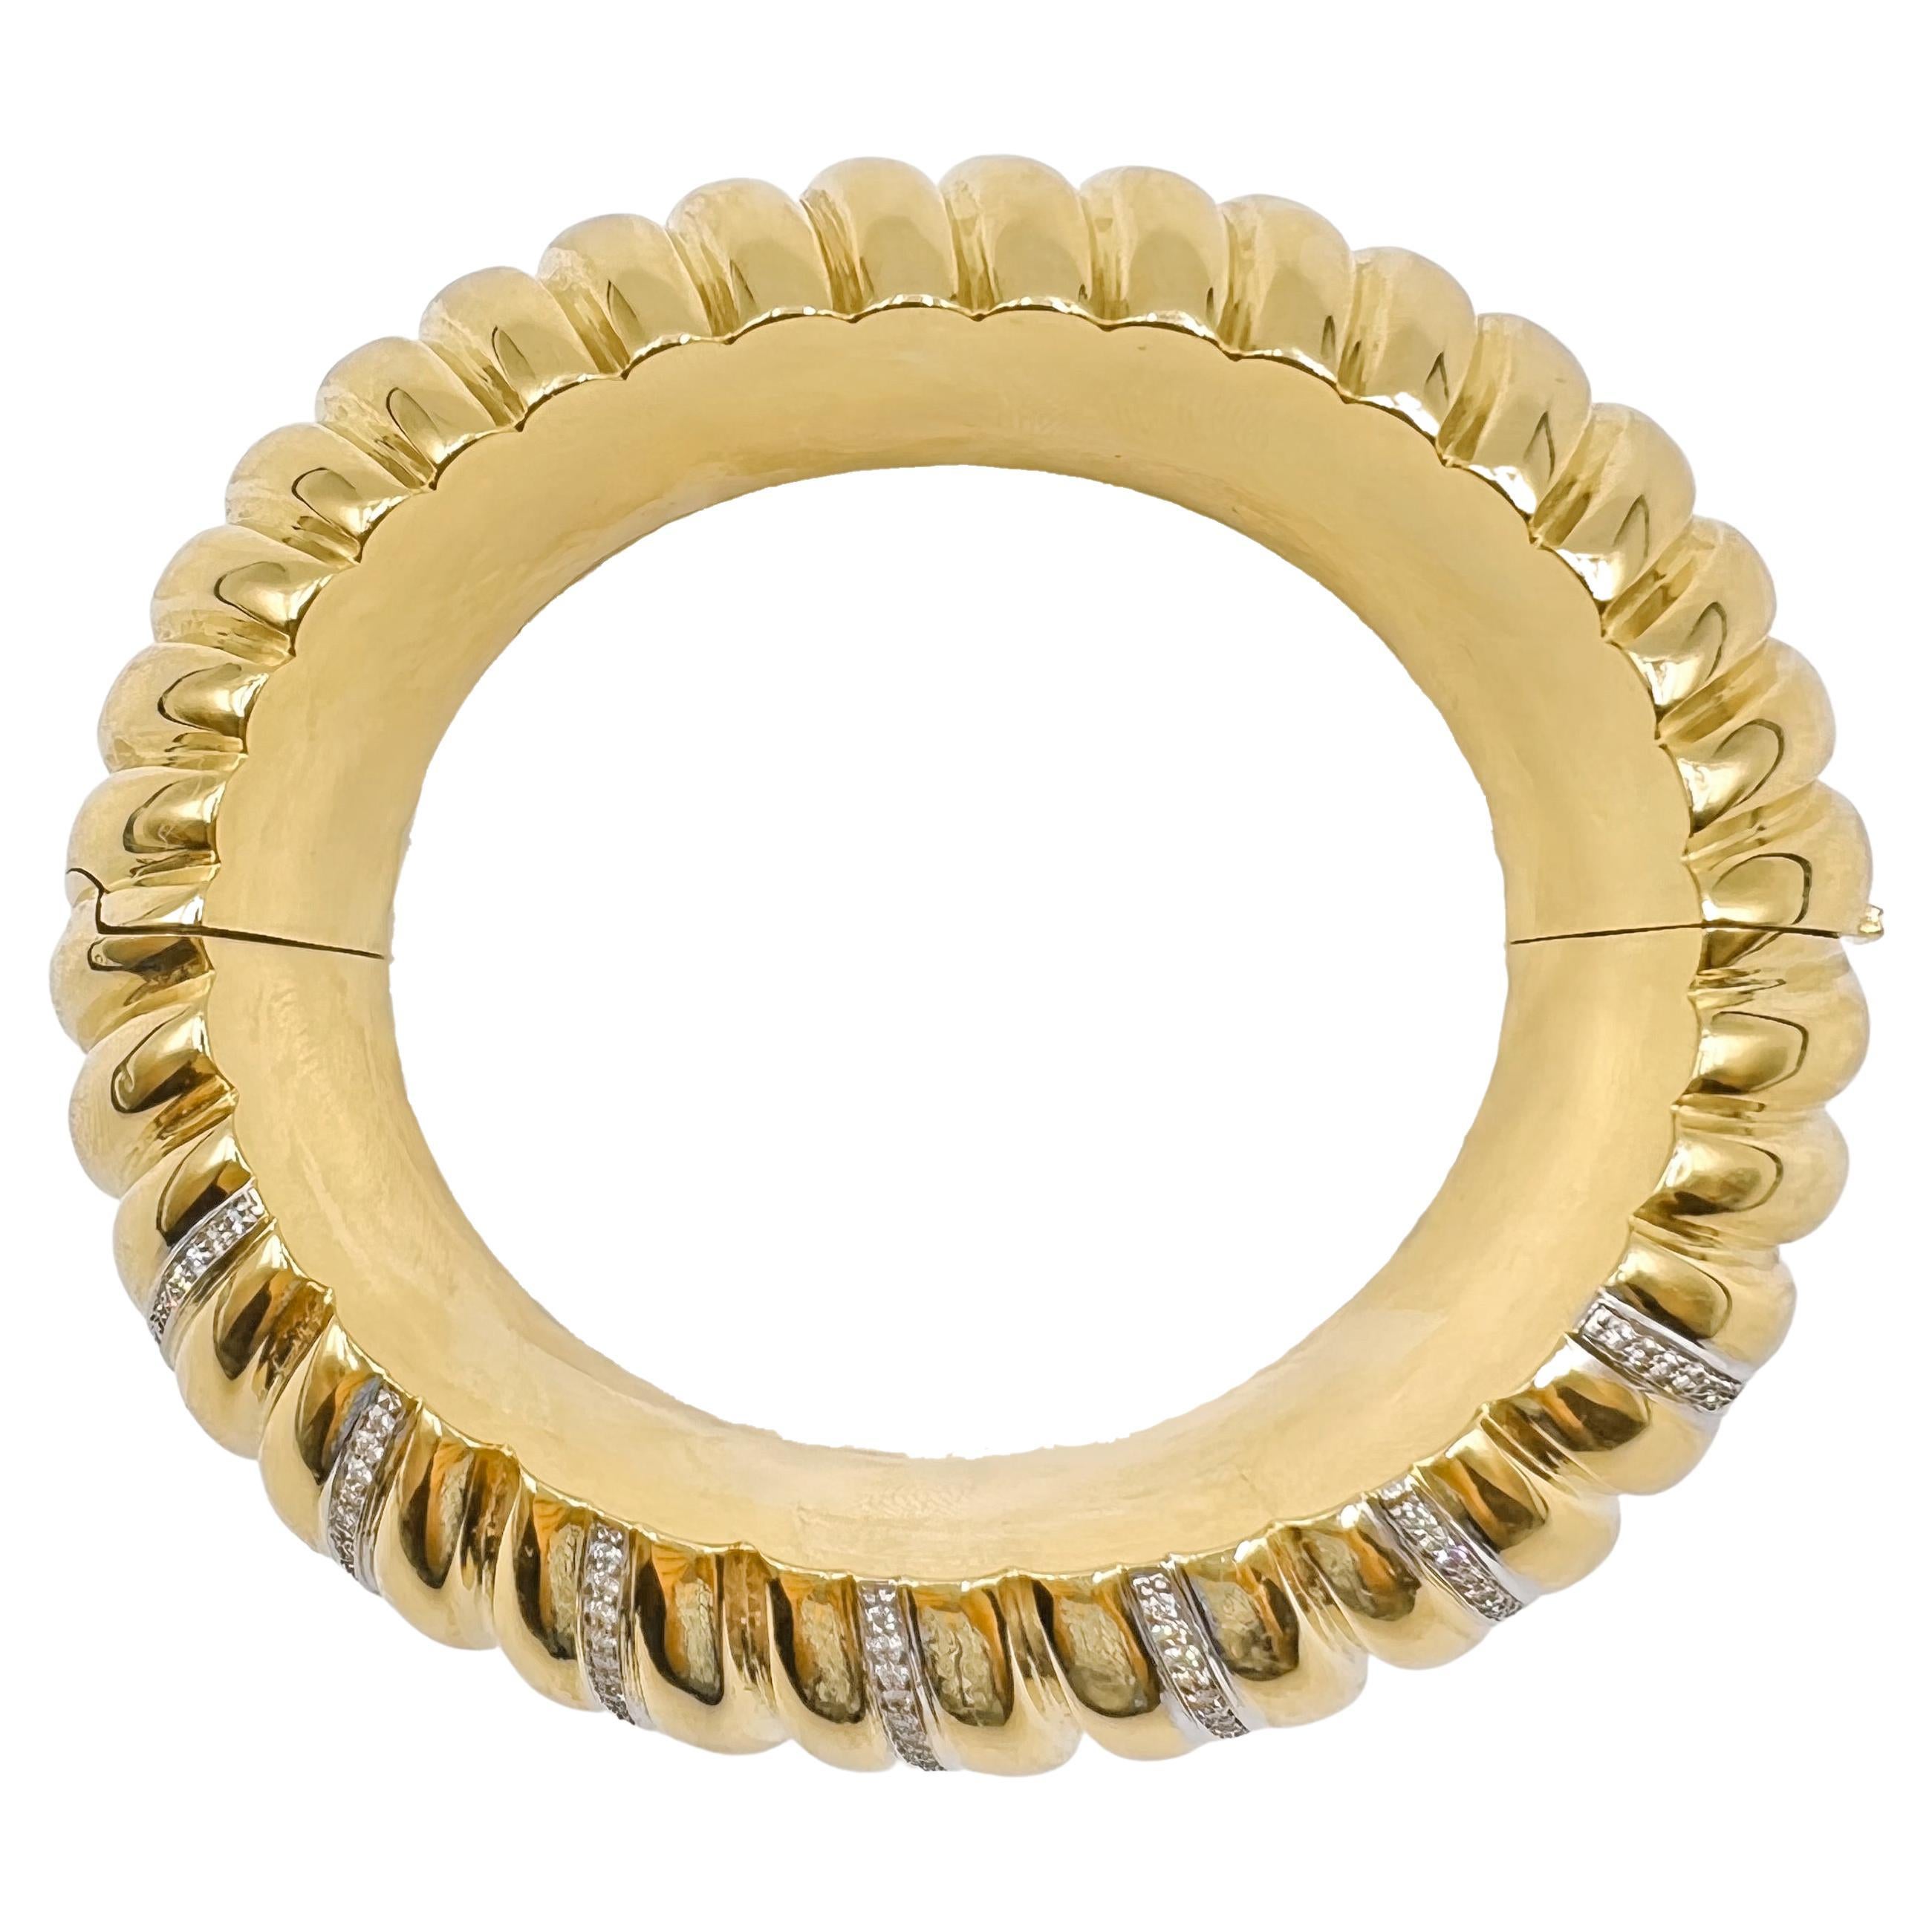 Wide oval-shaped bangle in polished and fluted 18k yellow gold, accented by seven rows of round-cut diamonds.  182 diamonds weighing approximately 1.80 total carats.  Hinged clasp with push button release.  Stamped 'RFMAS' for Faraone Mennella,